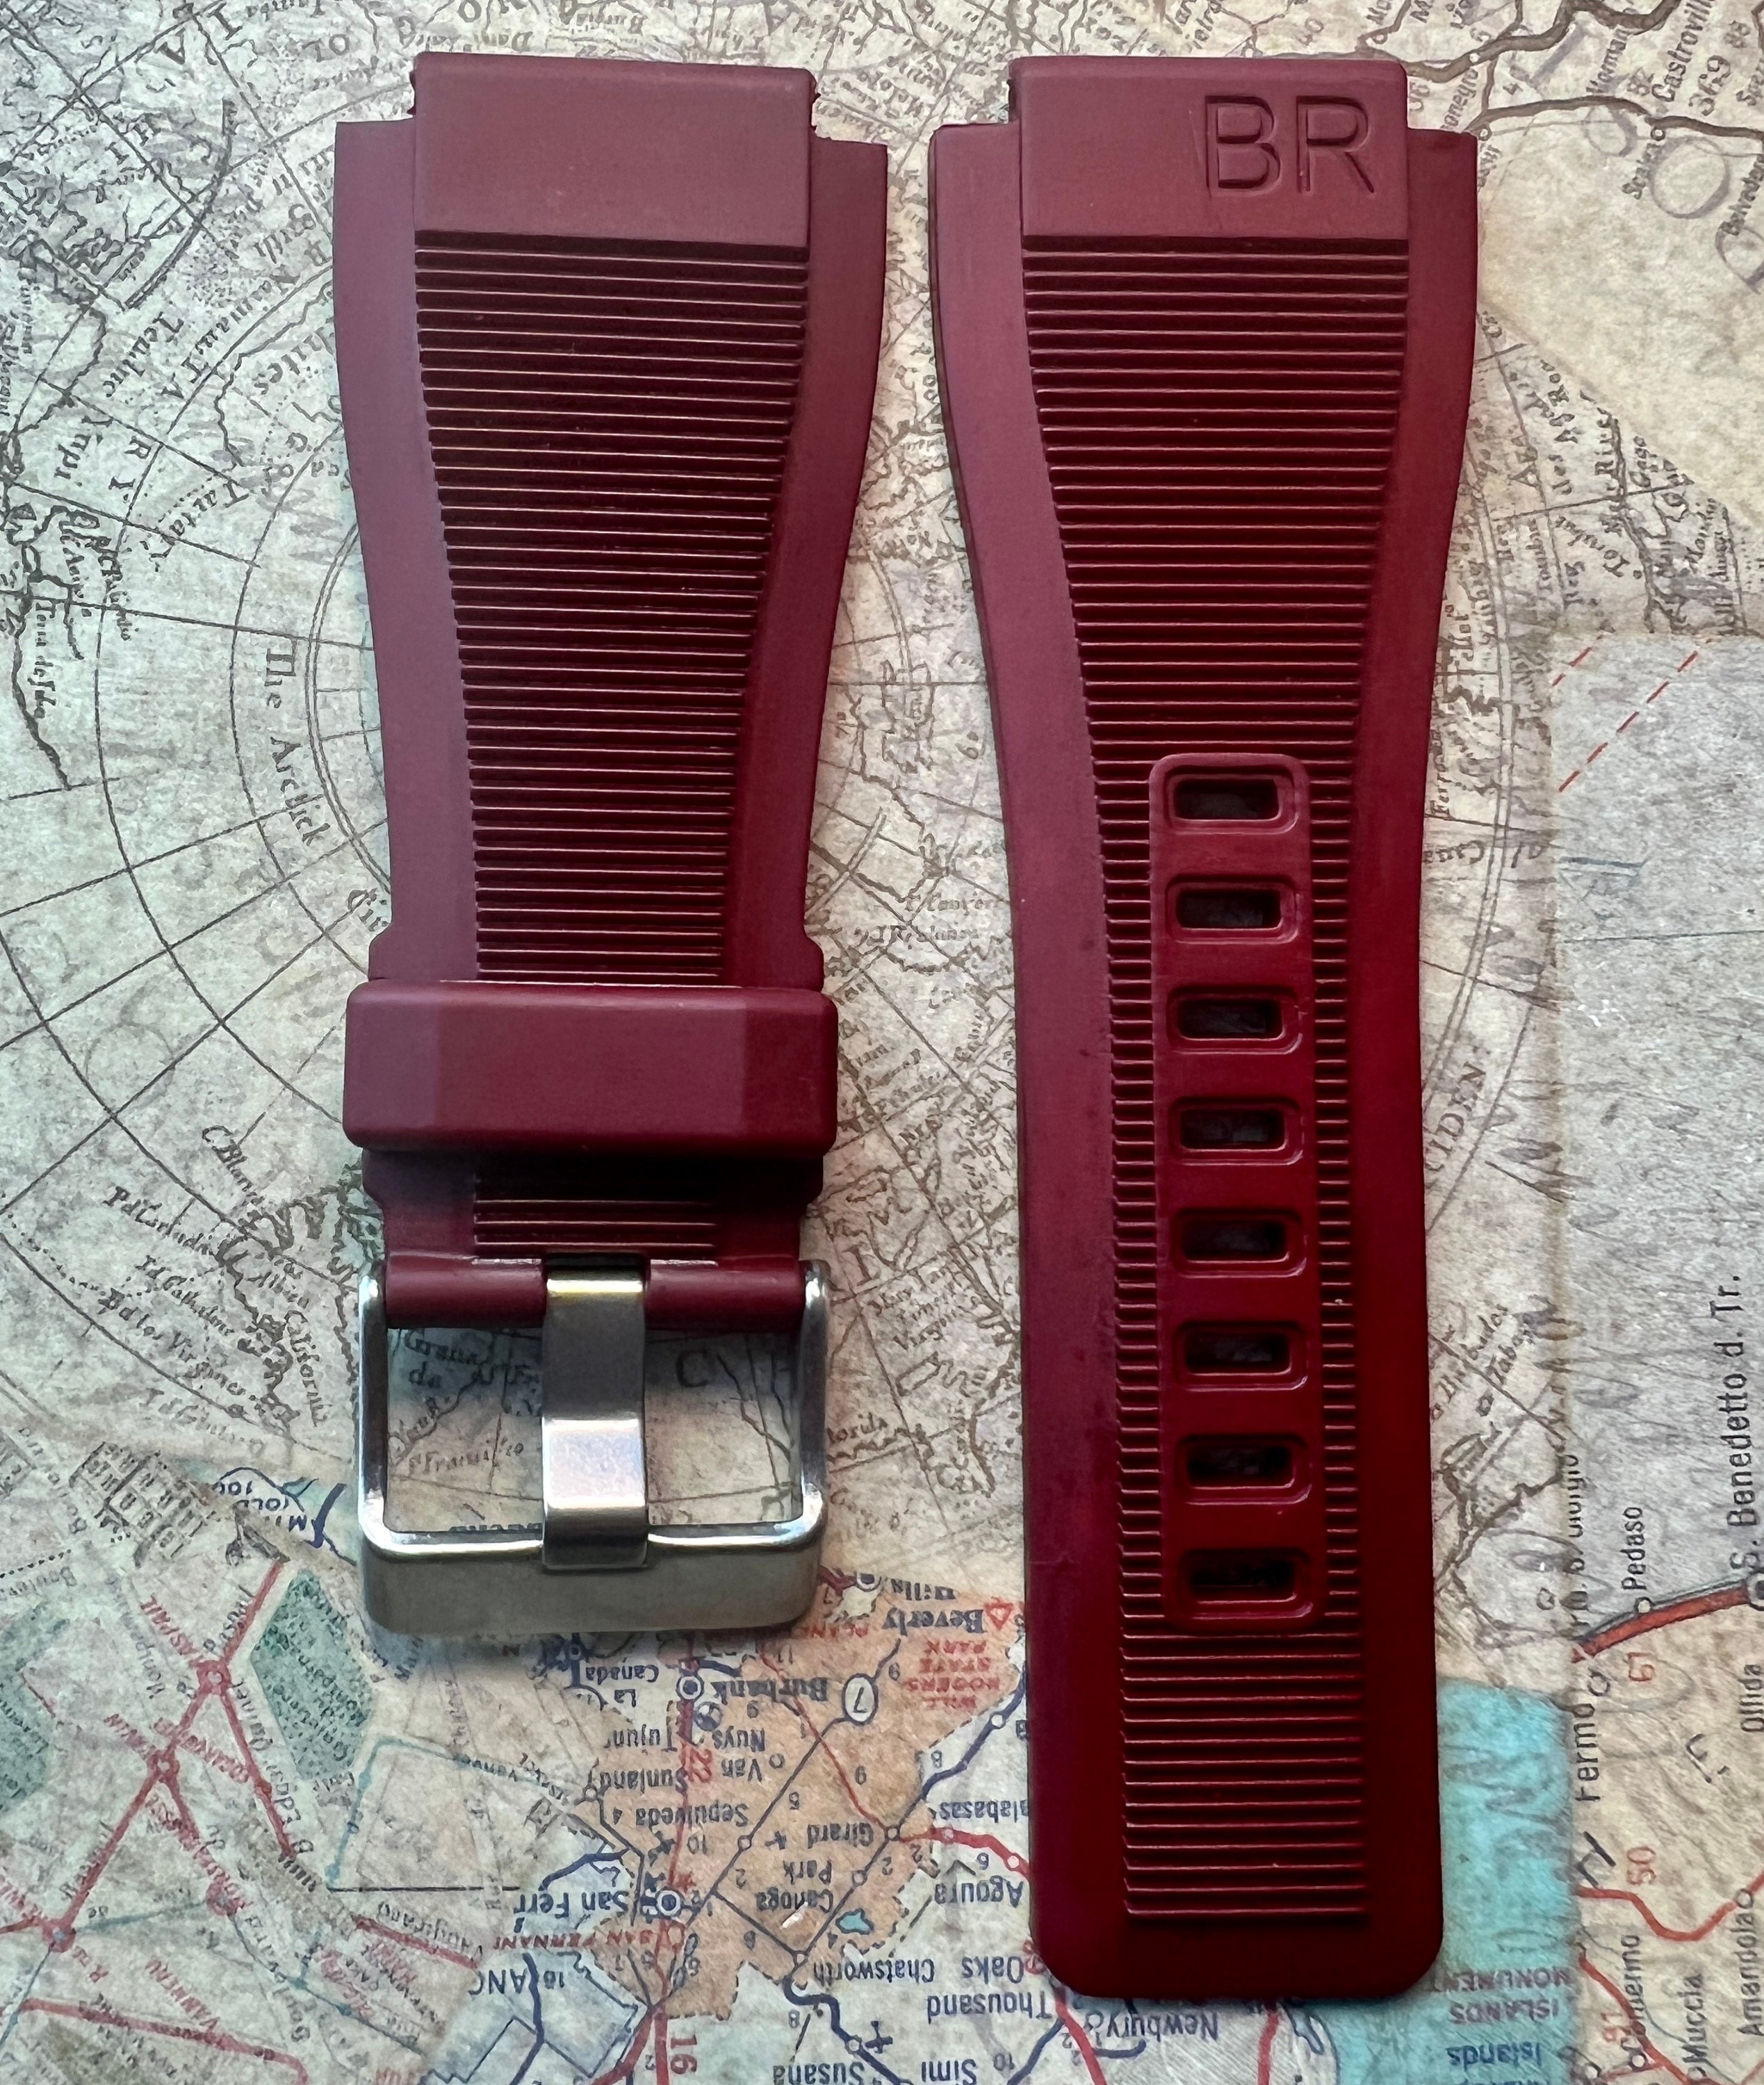 WINE Colored Vulcanized Rubber Strap/band Fits Br01 & Br03 - Etsy